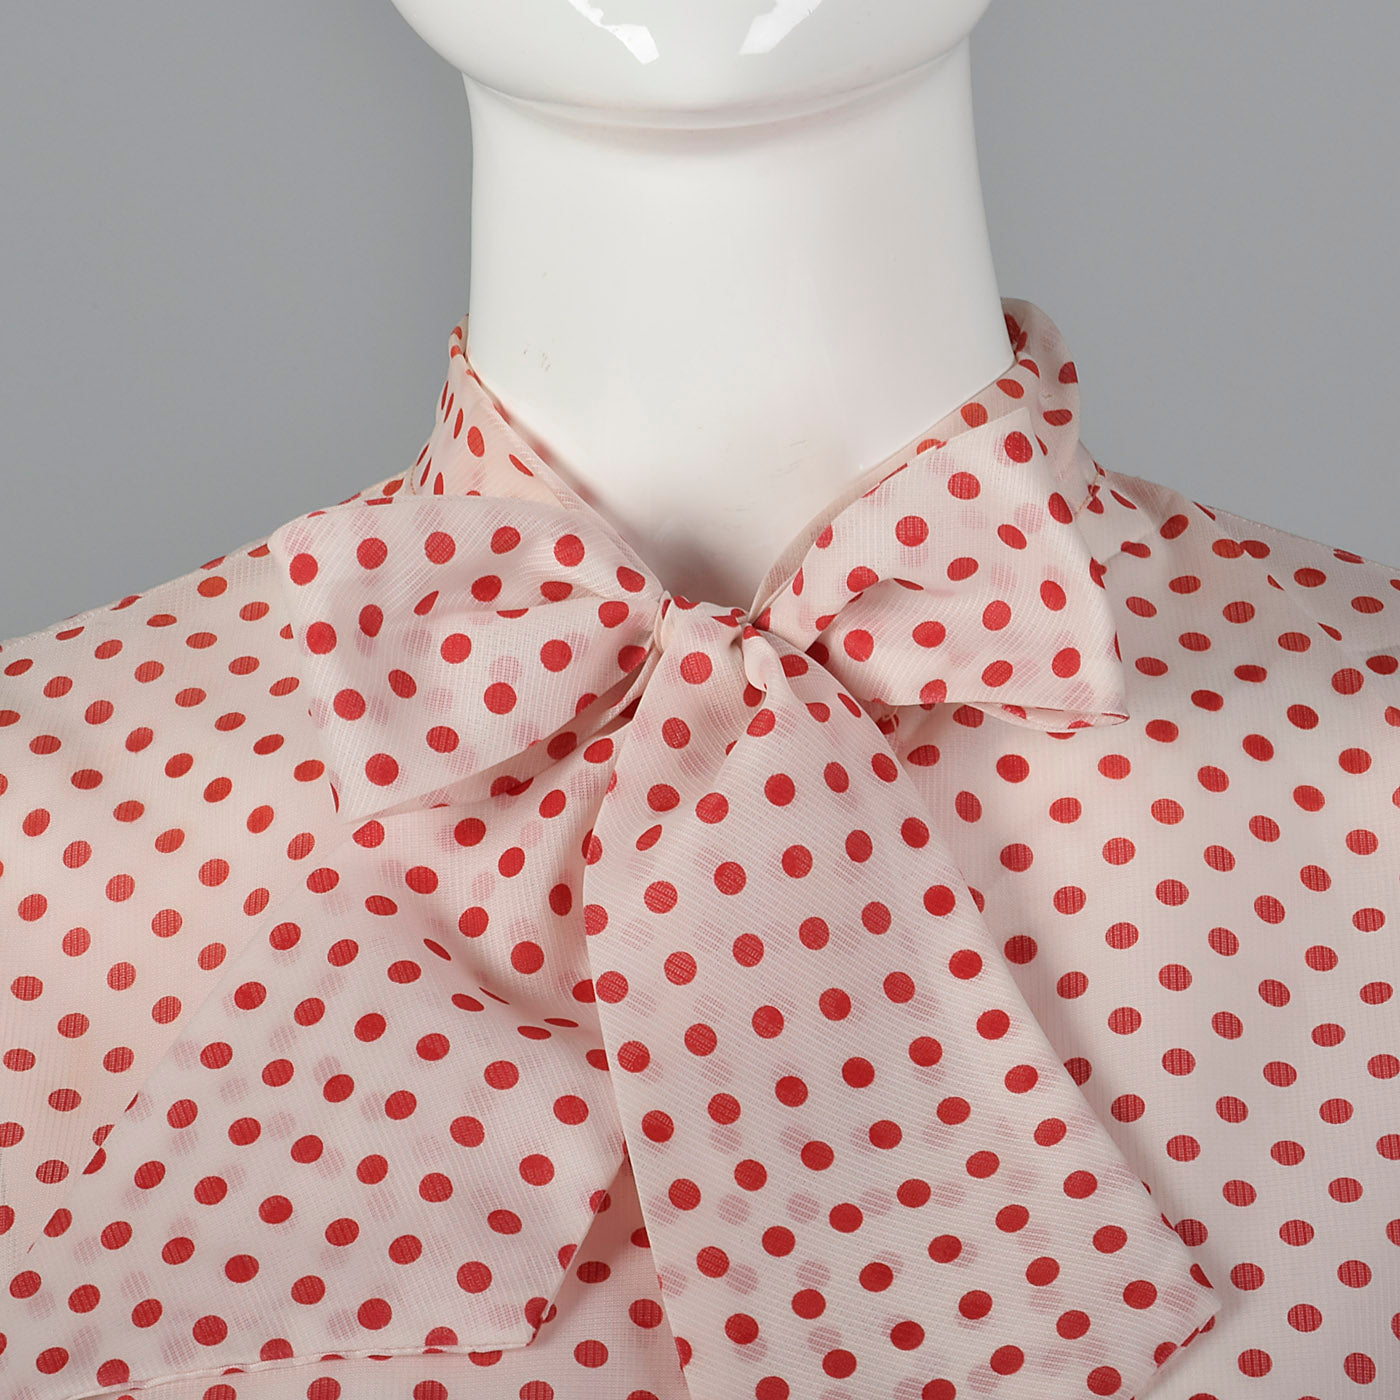 1960s White Blouse with Red Polka Dots